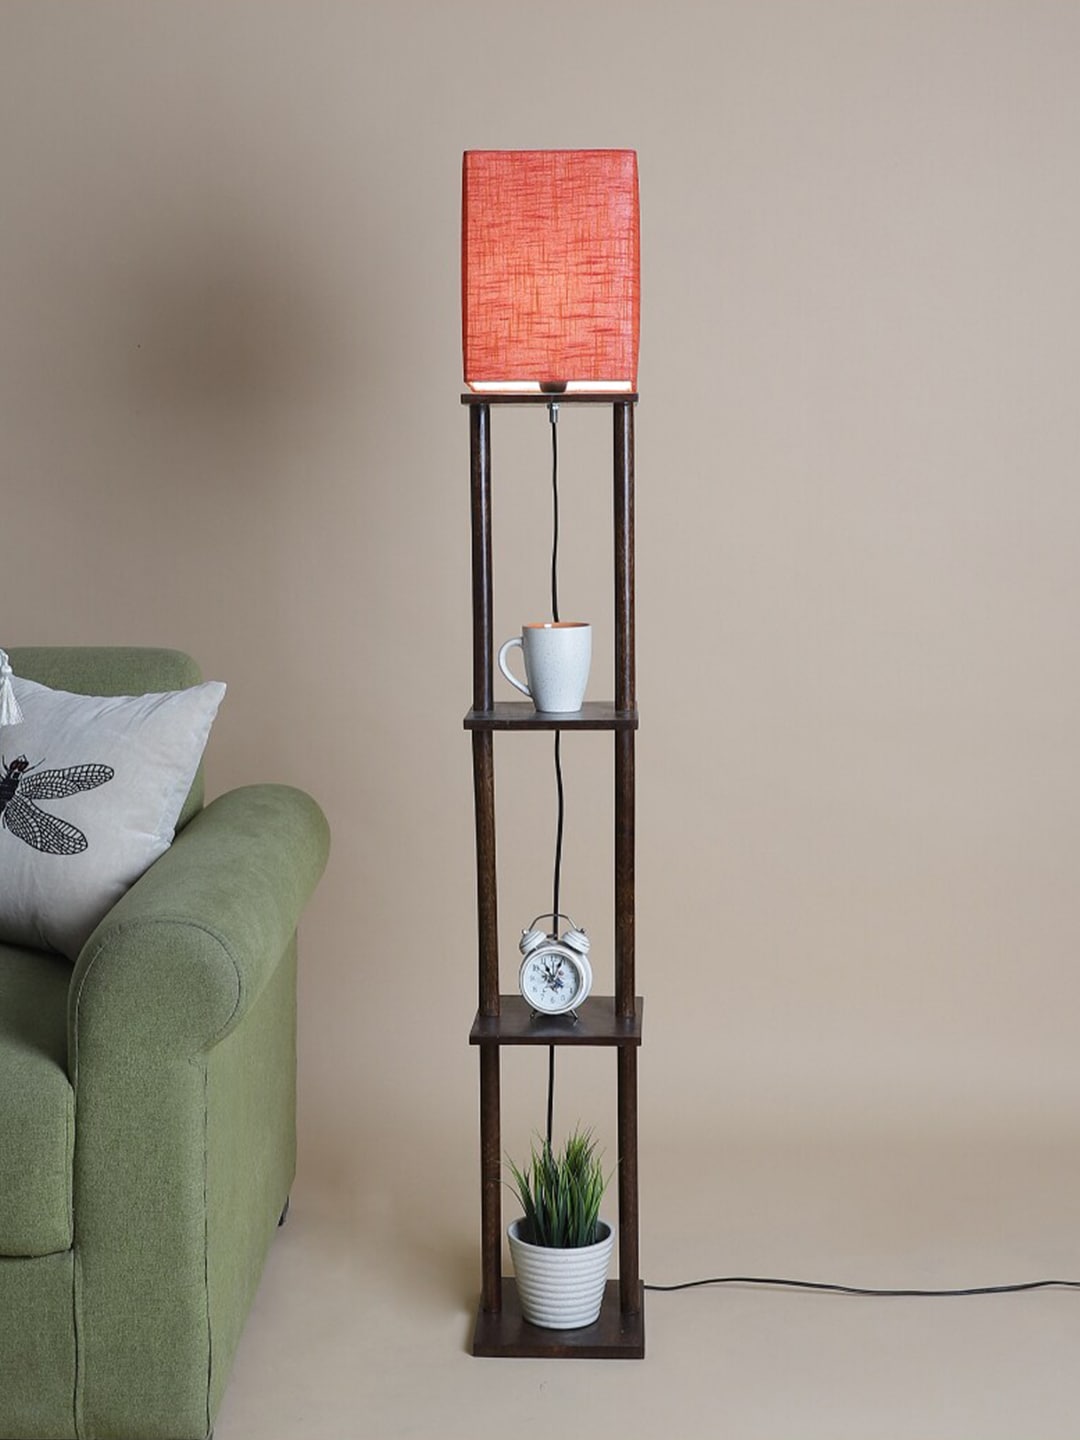 SANDED EDGE Red & Brown Contemporary Shelf Lamp with Shade Price in India